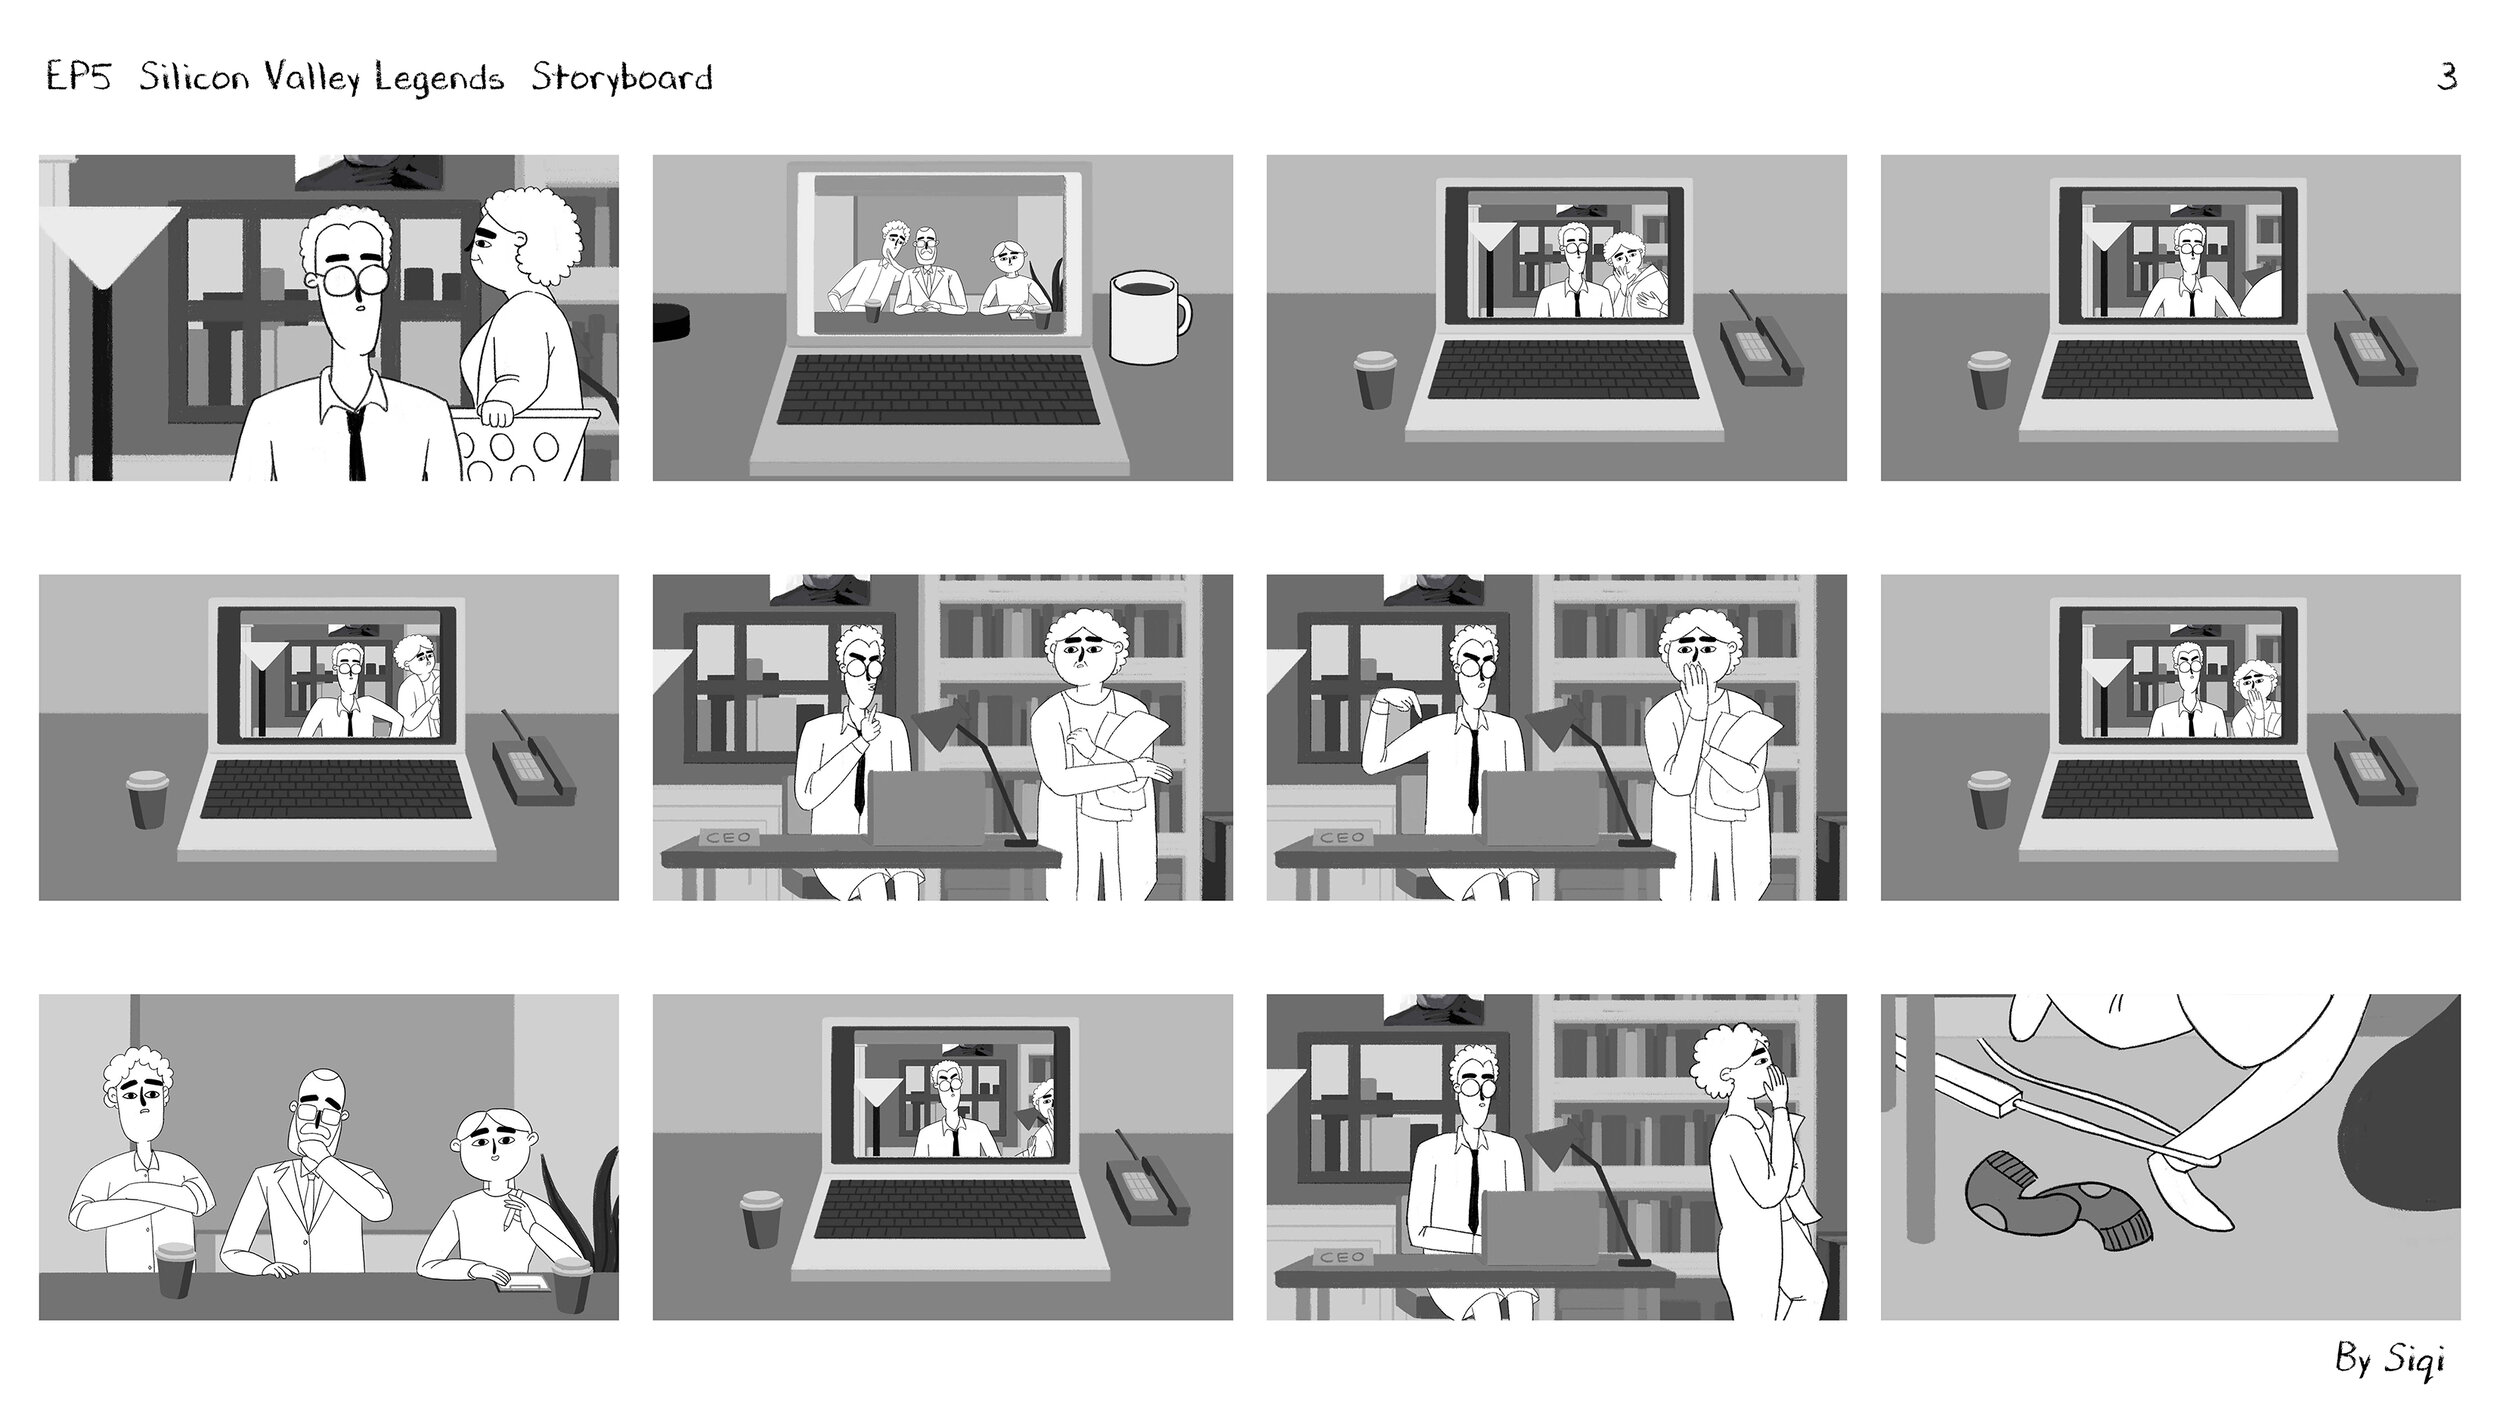 EP5_Silicon Valley Legends_Storyboard_Page_3.jpg